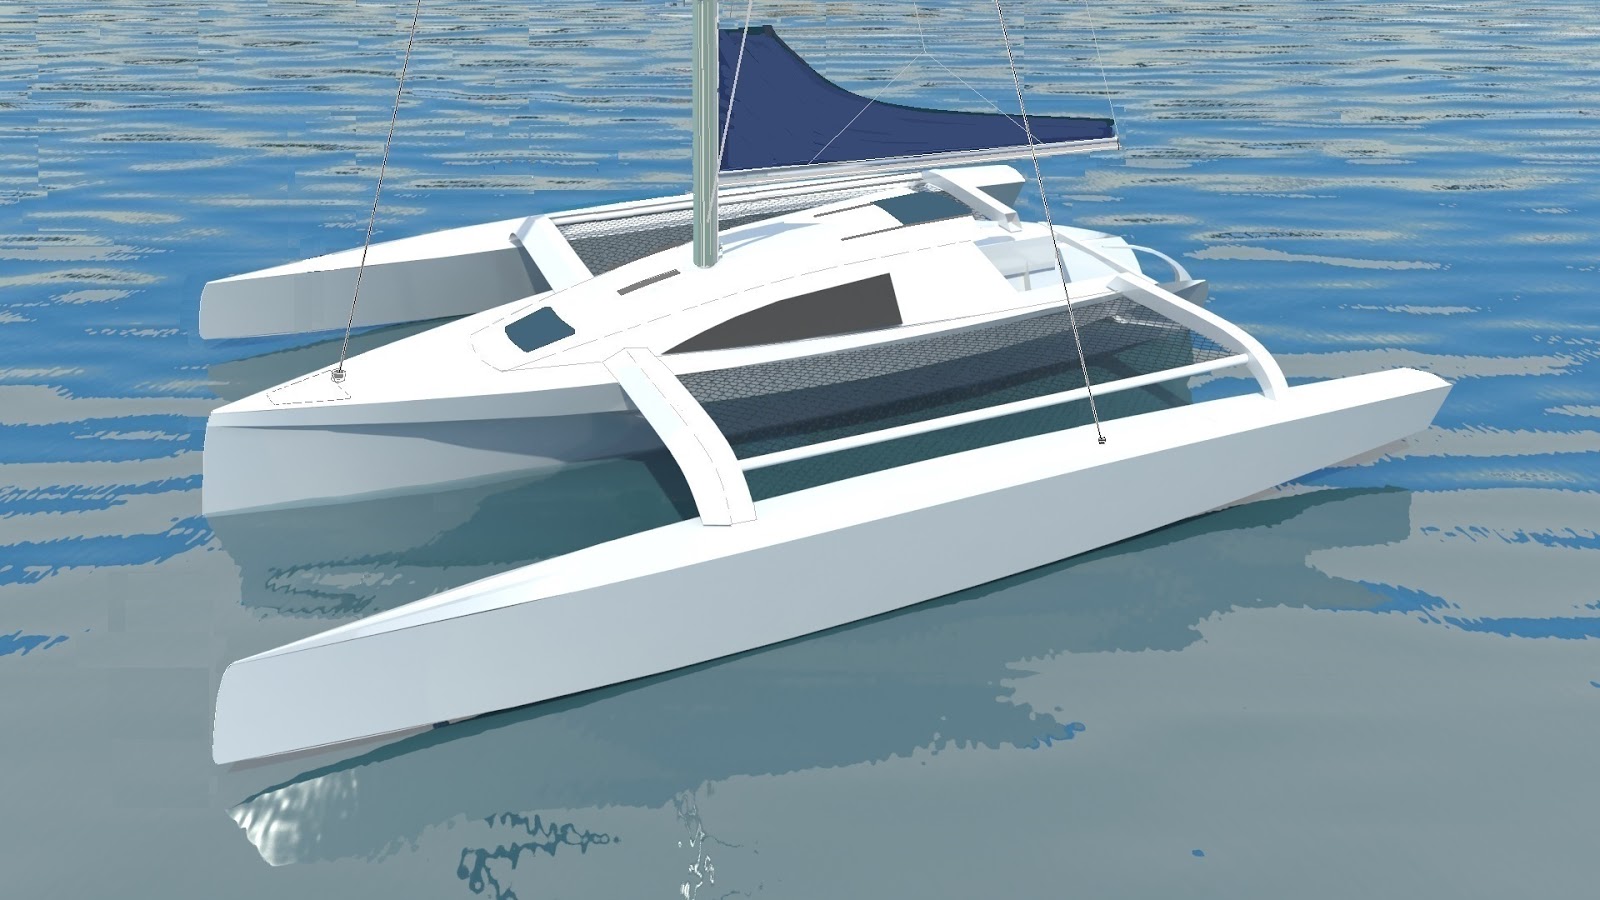 Trimaran Projects and Multihull News: Interview with Wayne 